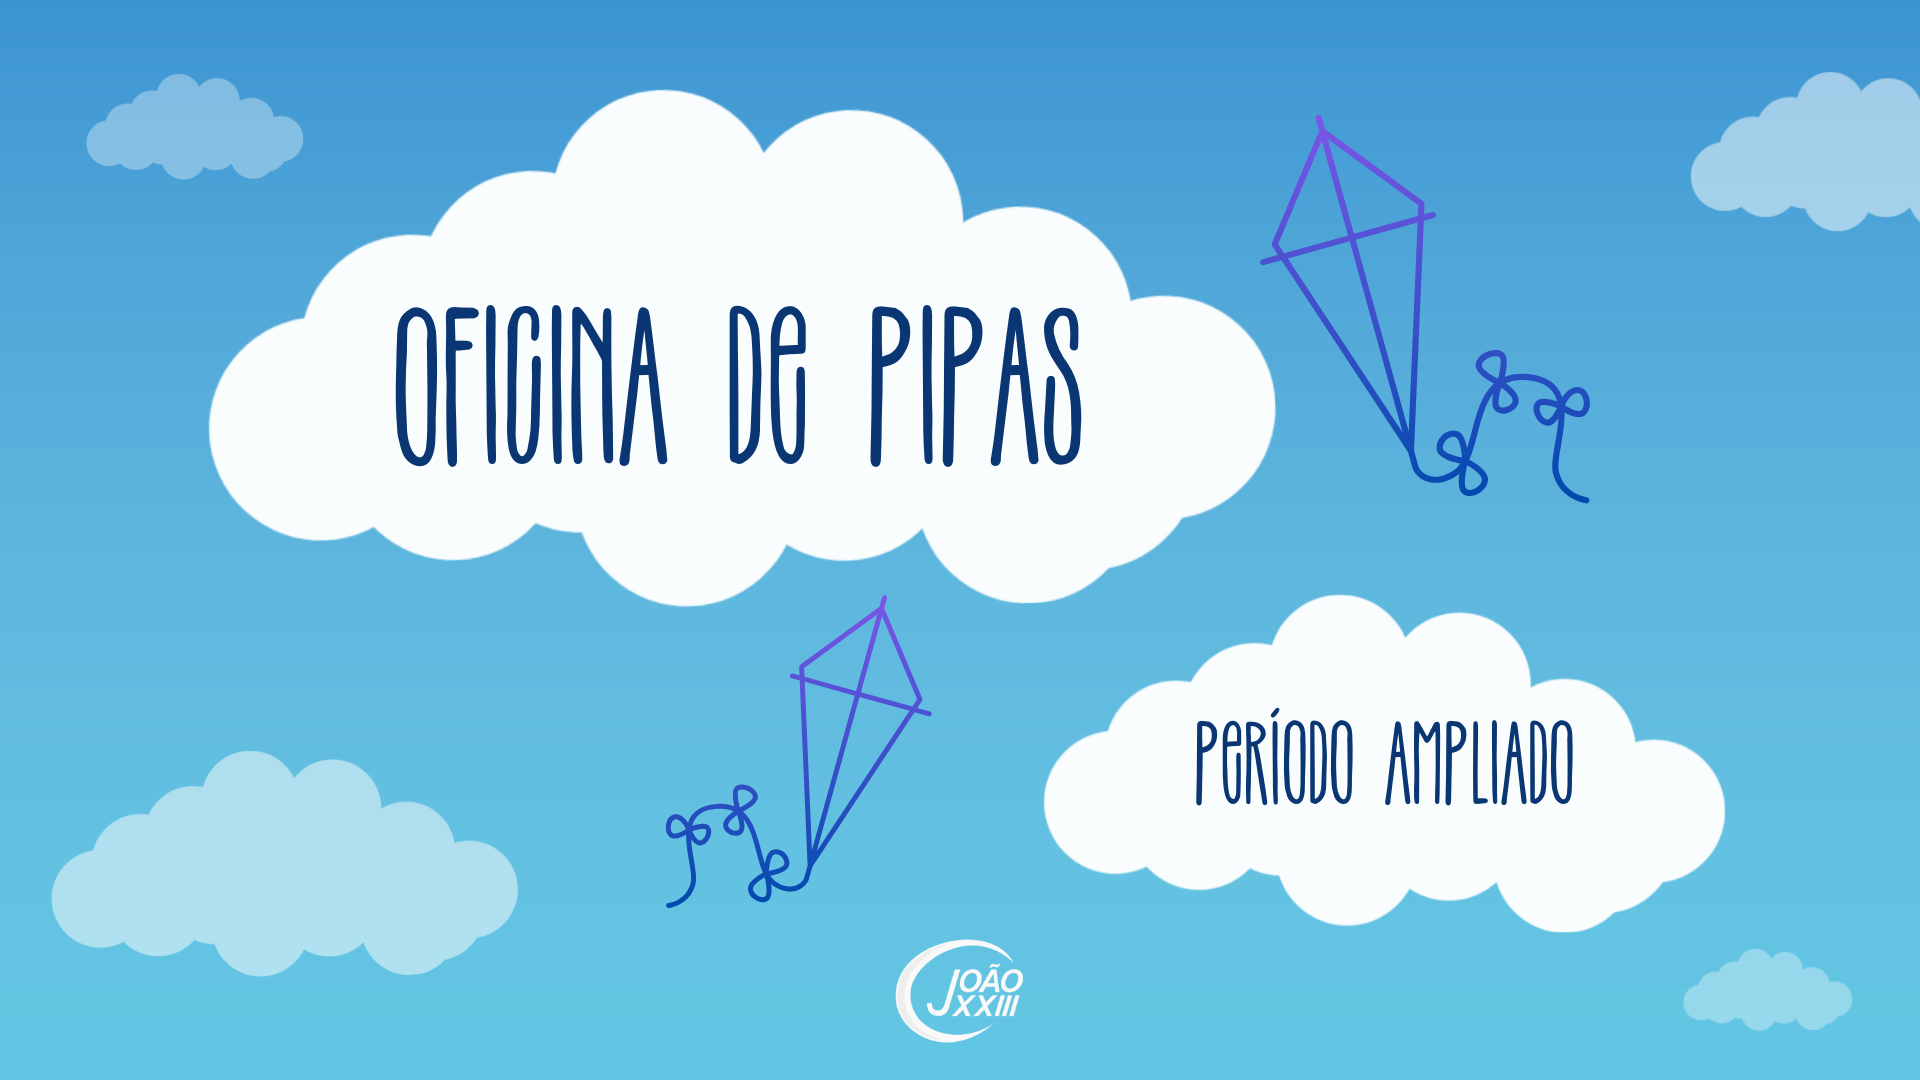 You are currently viewing Oficina de pipas